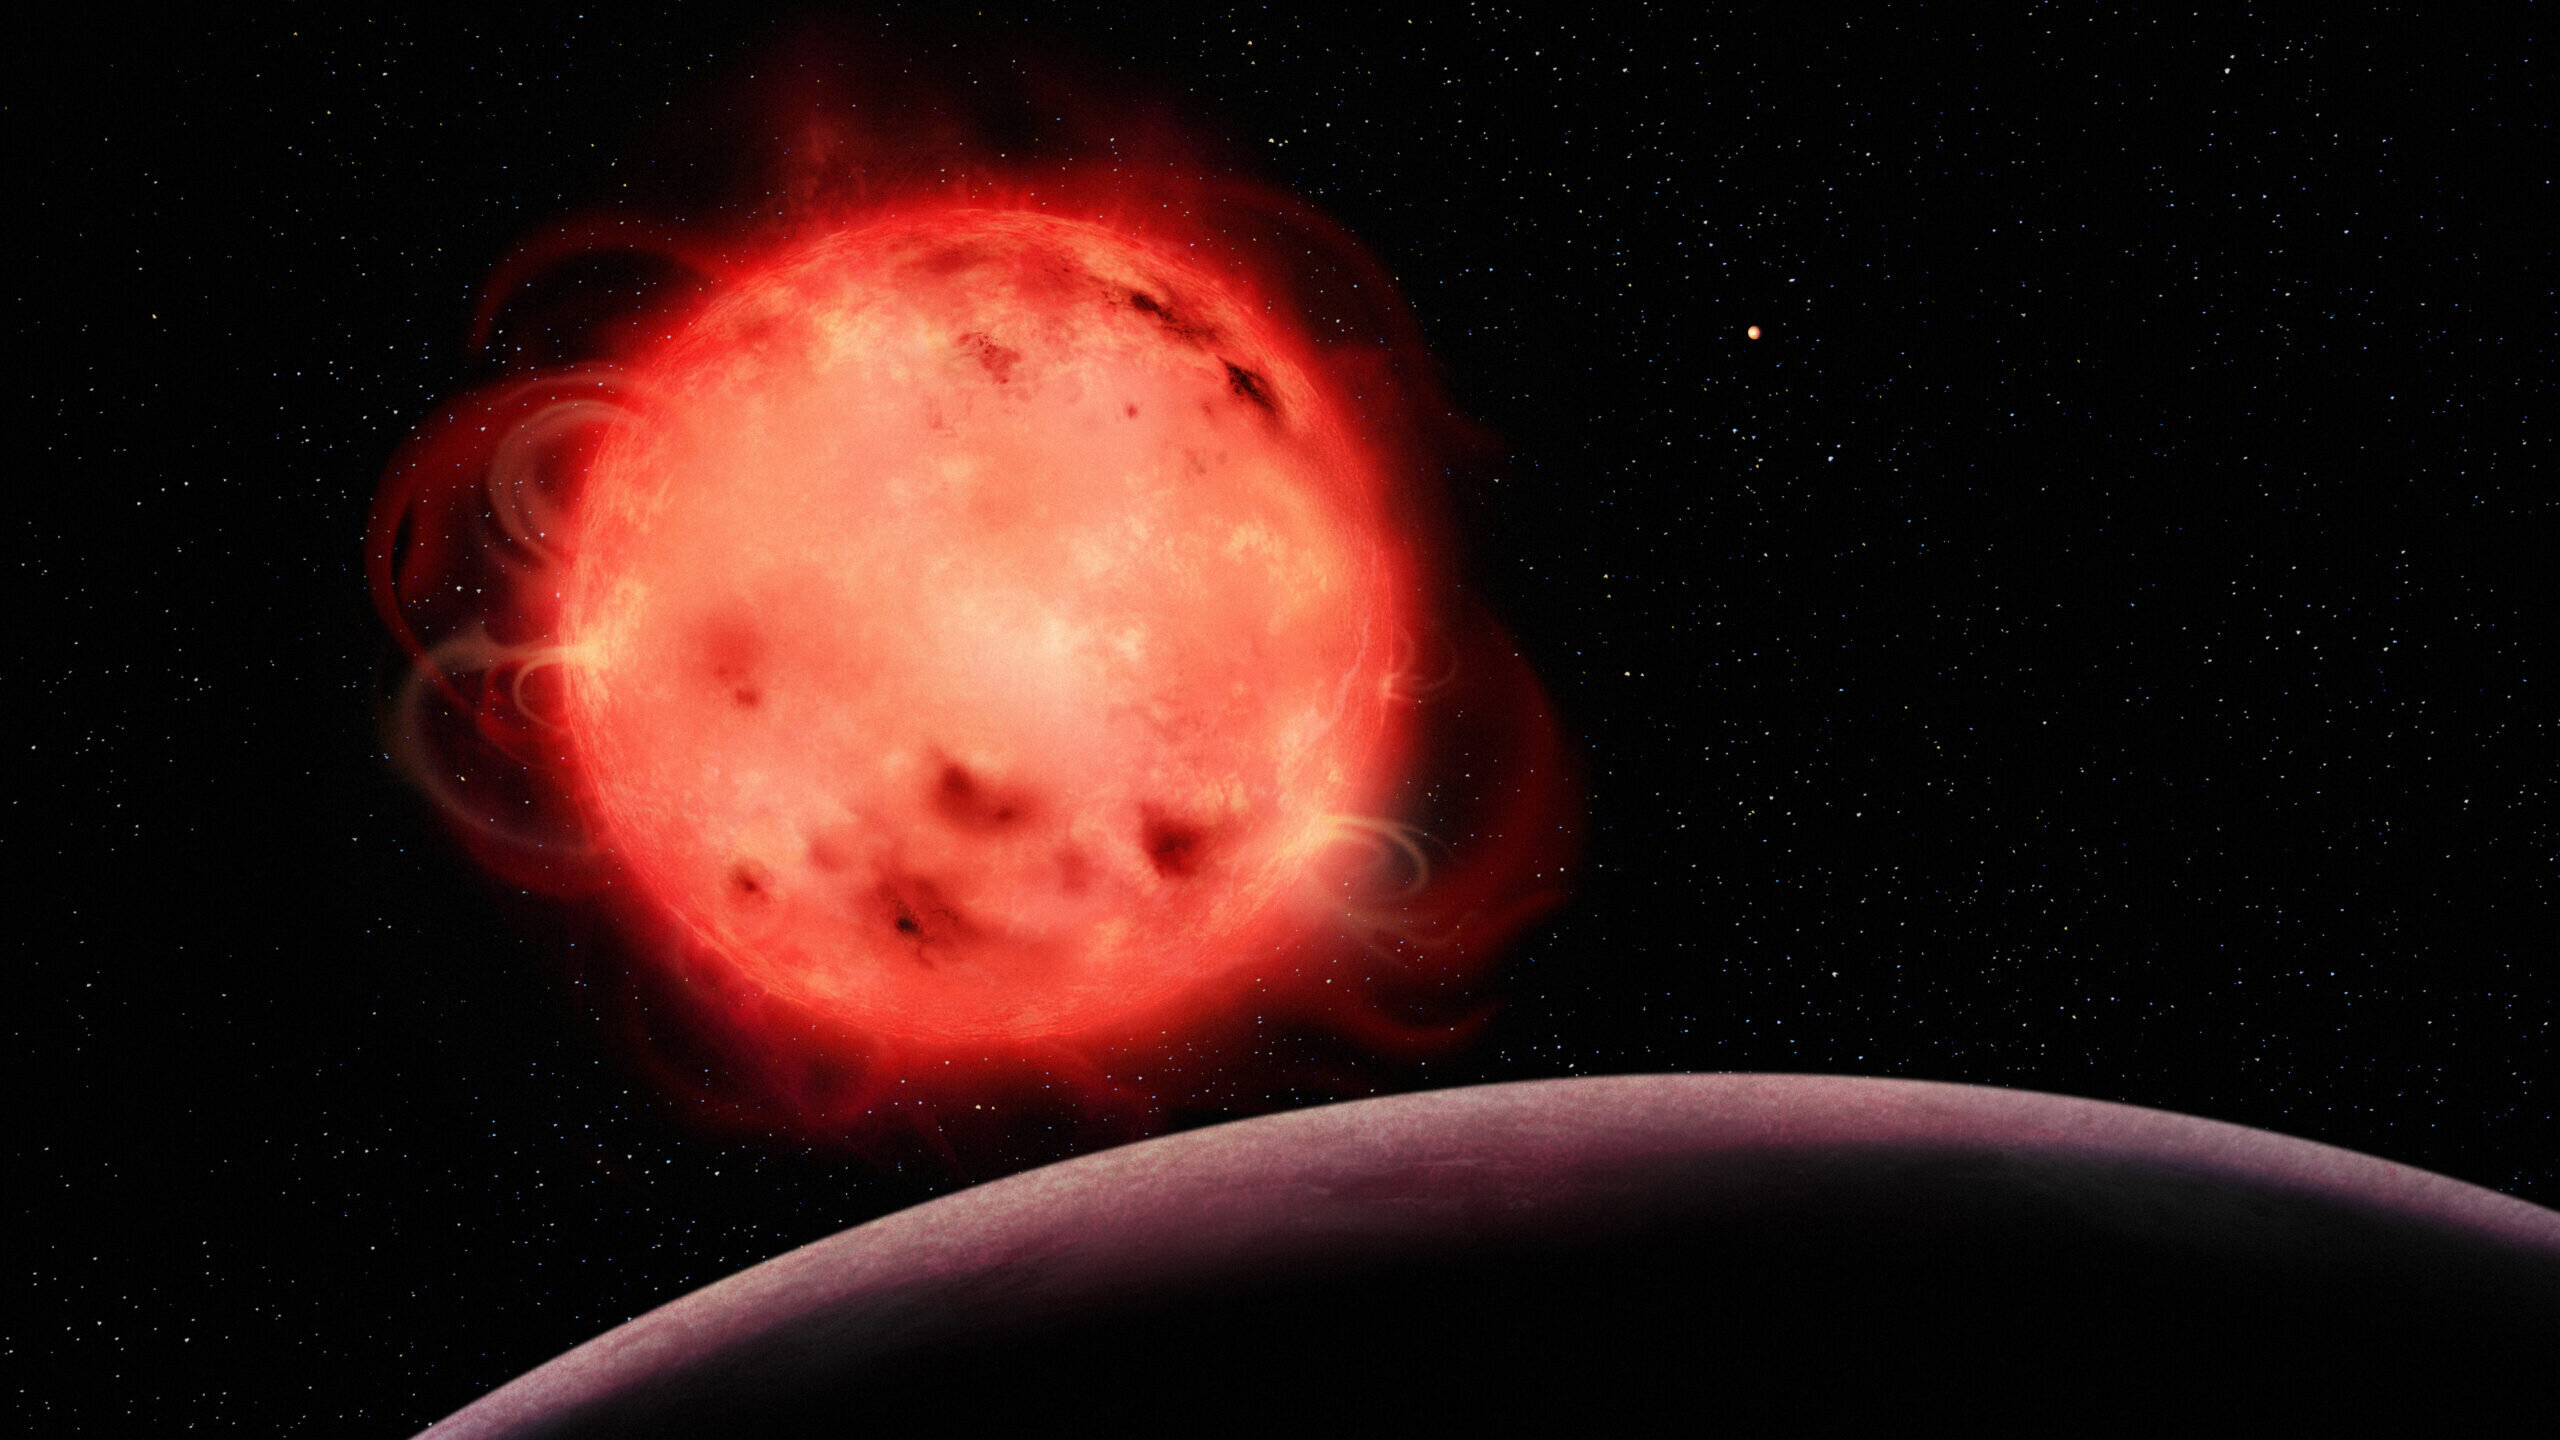 A blazing red star is seen with just part of a planet in the foreground.